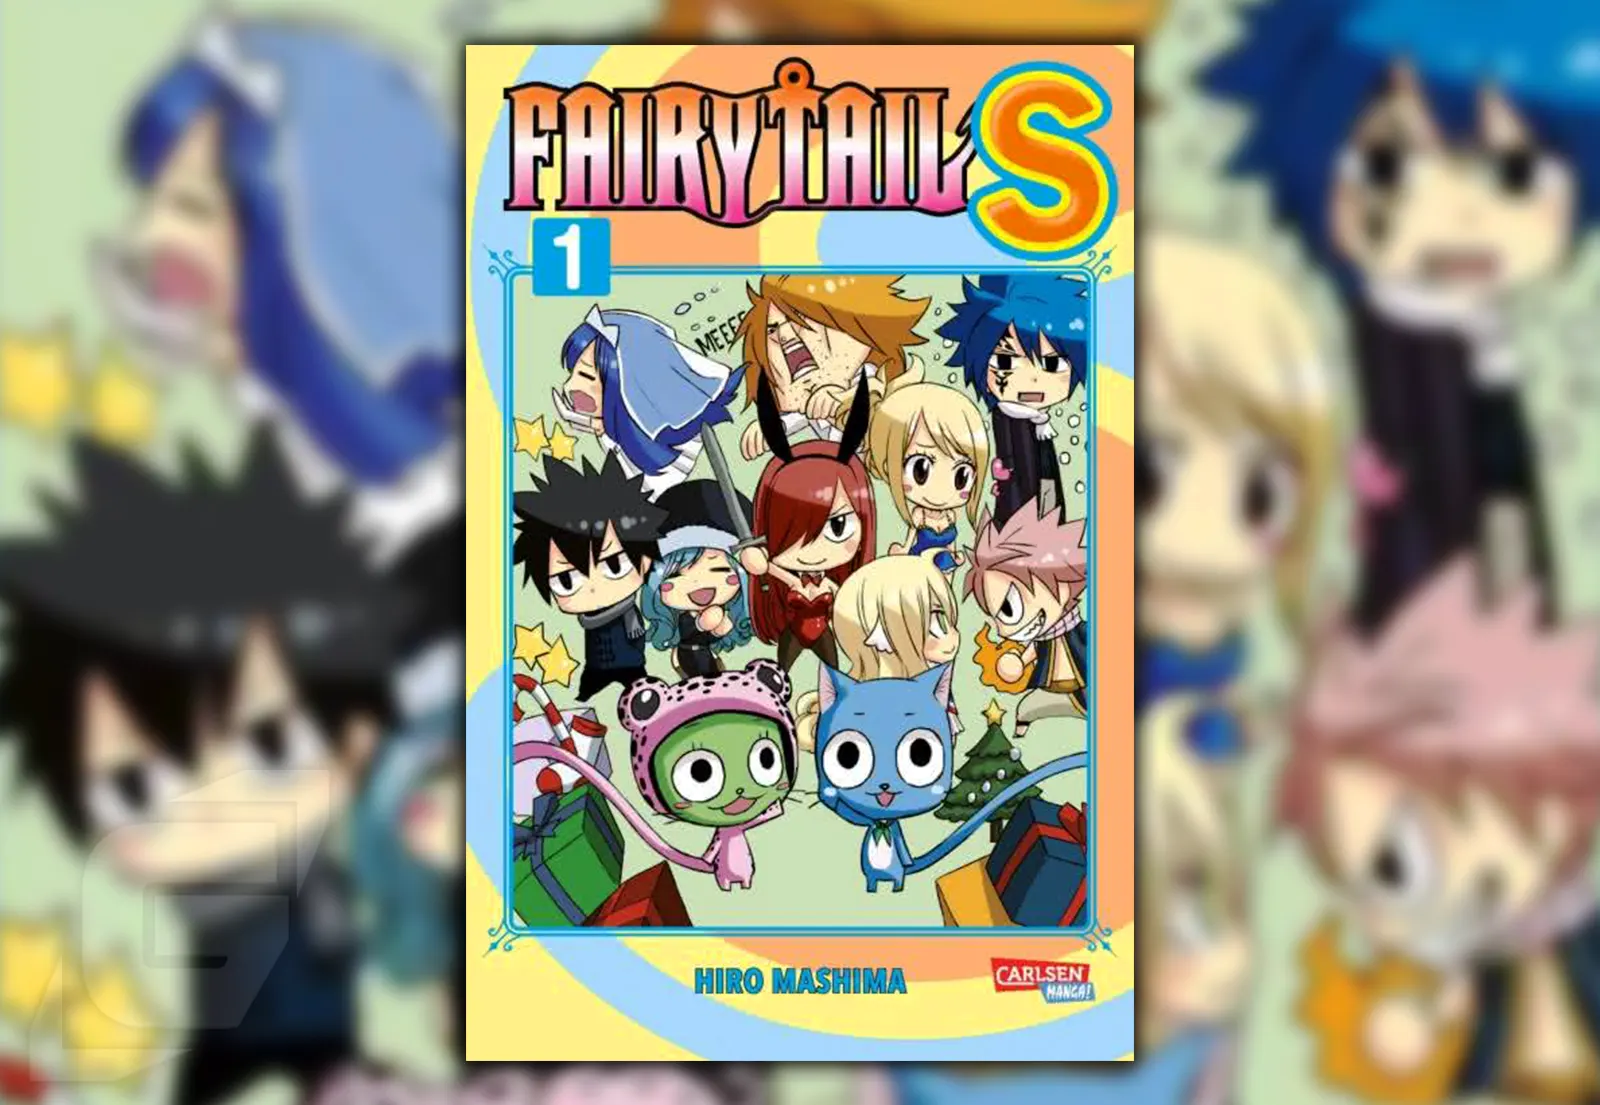 Fairy Tail S Band 1 - Die Review